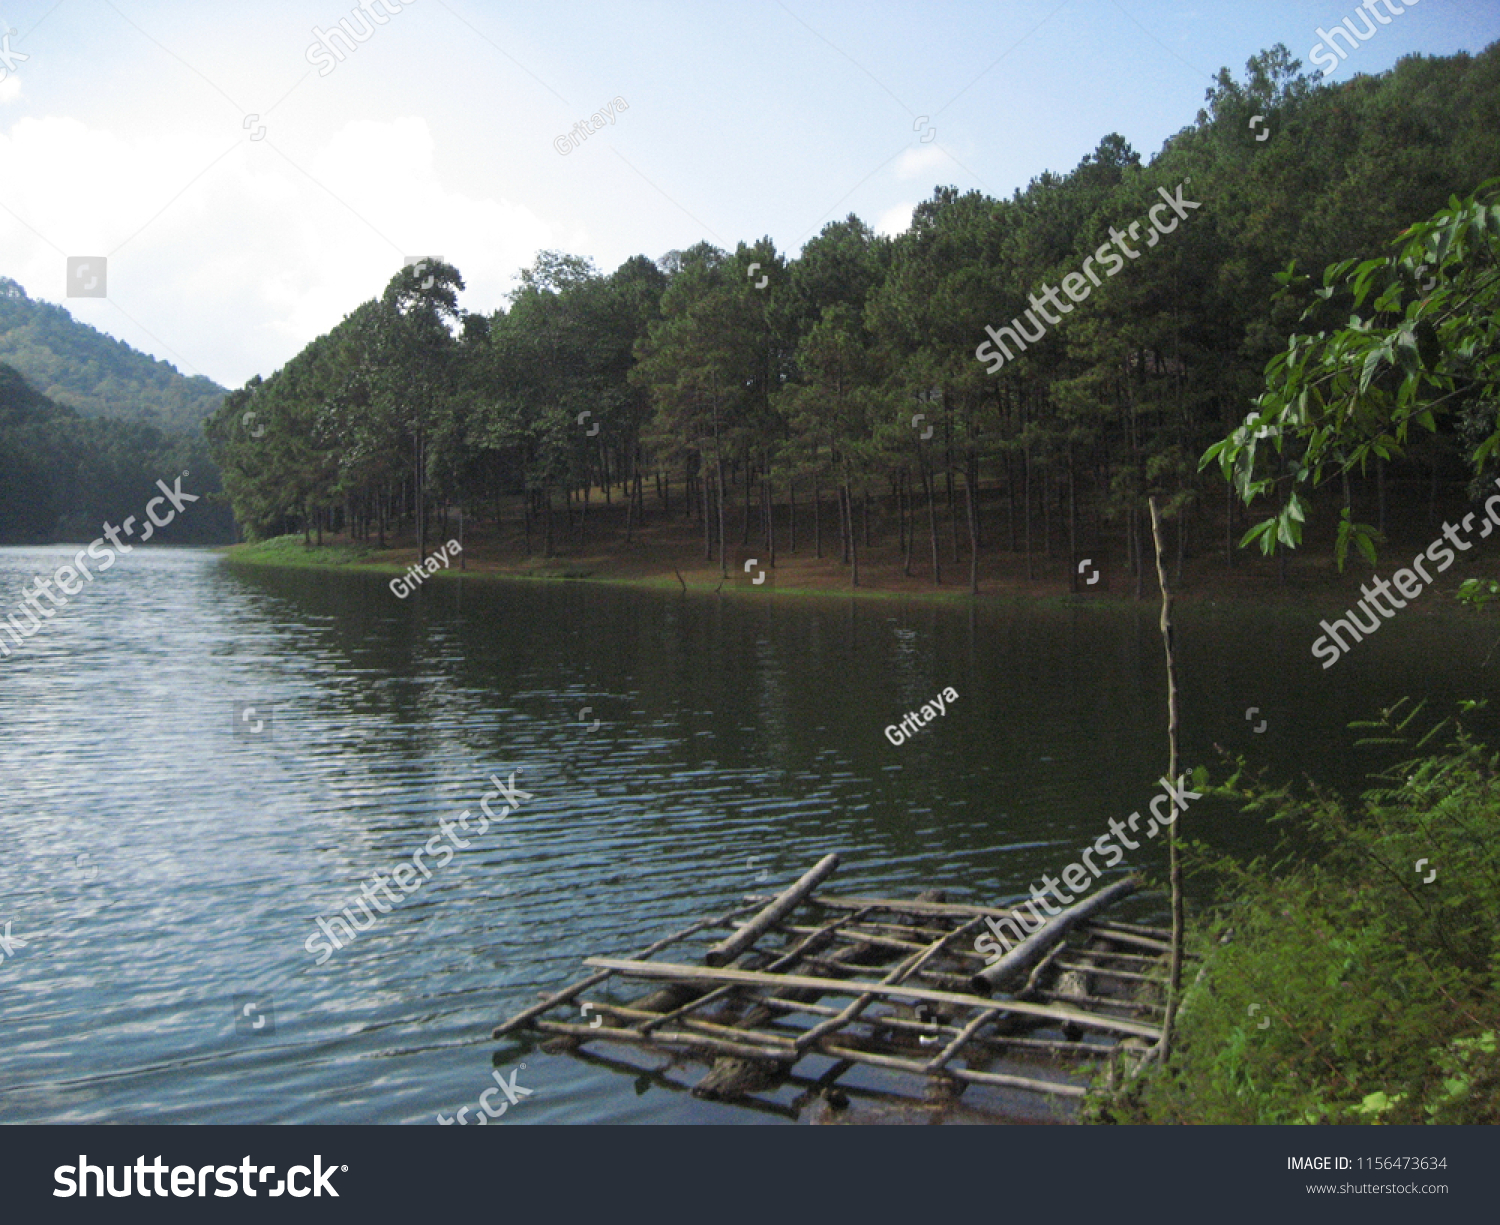 Pang Ung Beautiful Places World Could Nature Stock Image 1156473634